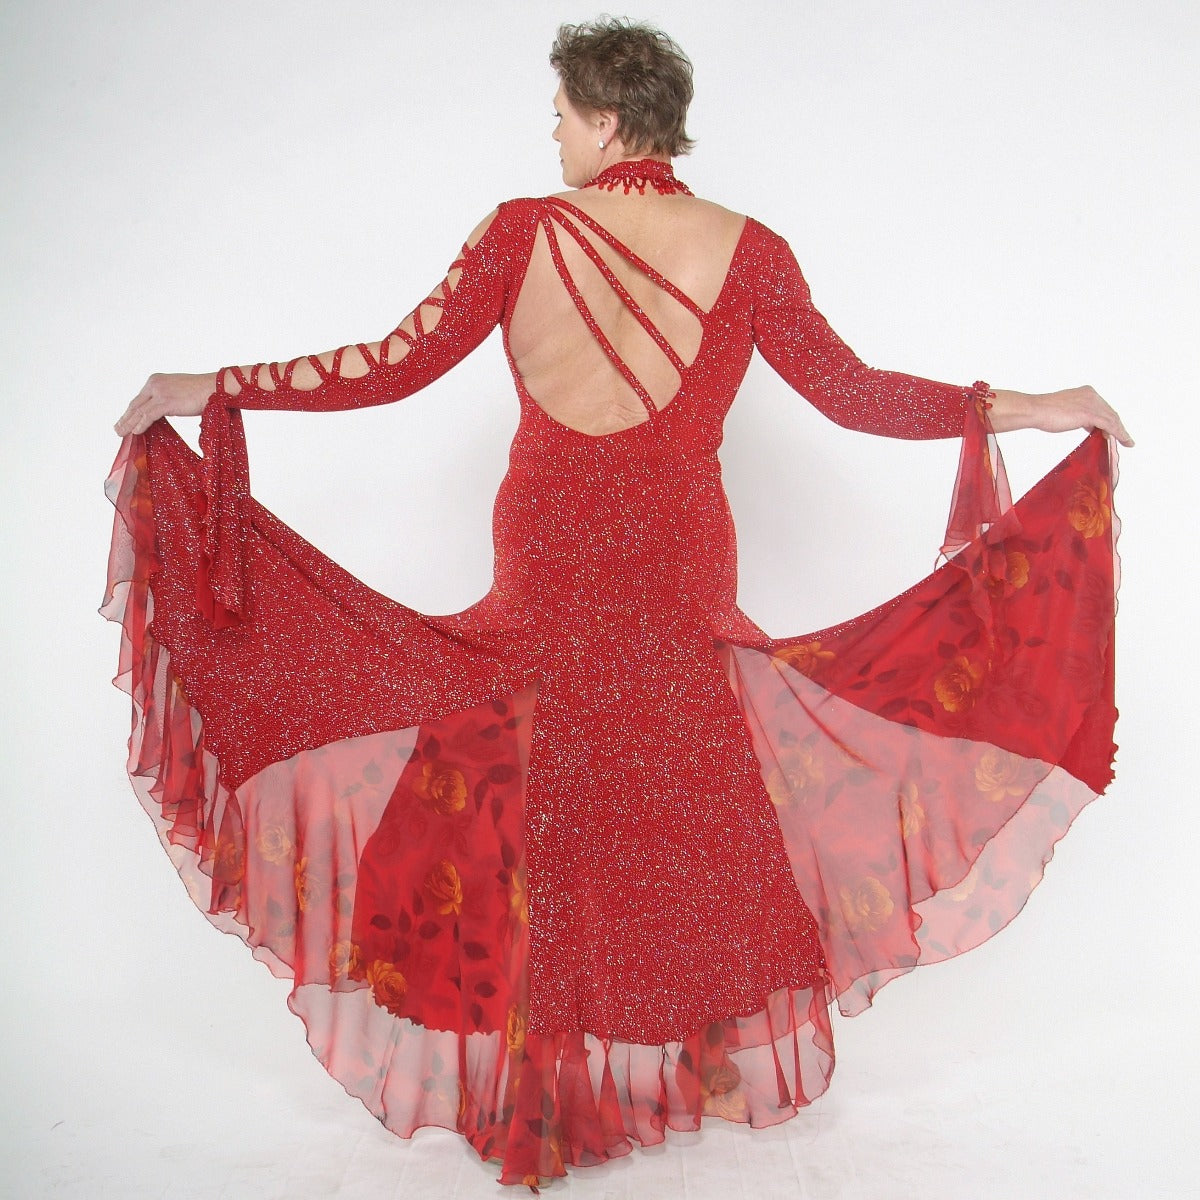 back view of Red ballroom dress created in red glitter slinky with print chiffon insets features lattice detailing in bodice along with matching hand beaded choker…hand beading at the edge of right sleeve.